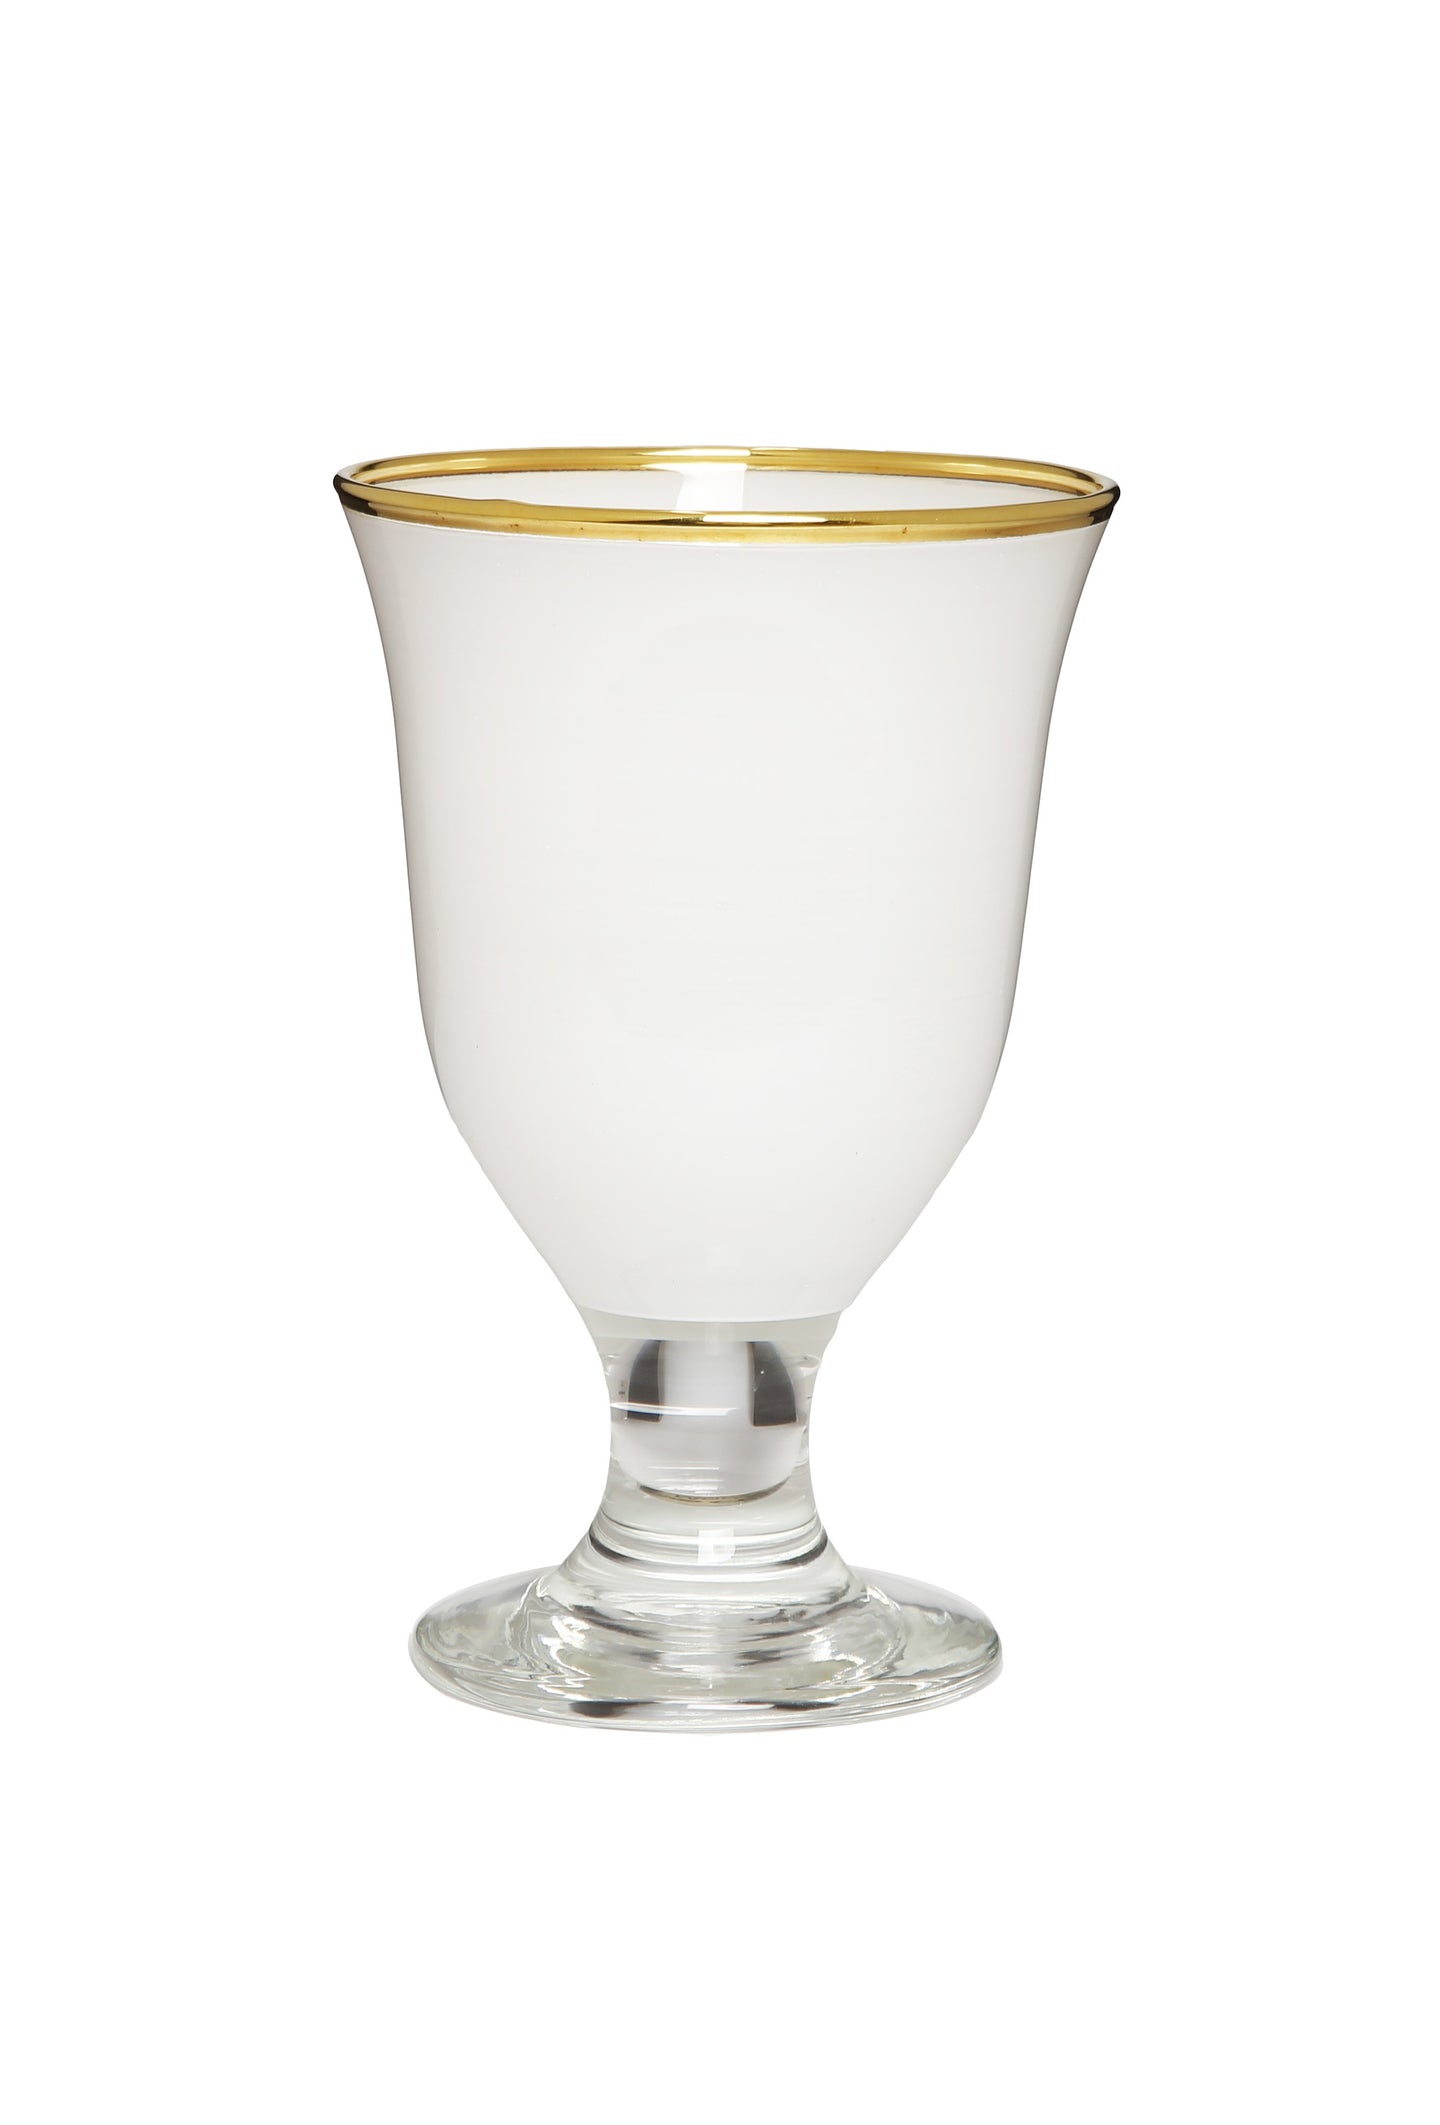 Set of 6 Short Stem Water Glasses White with Clear Stem and Gold Rim